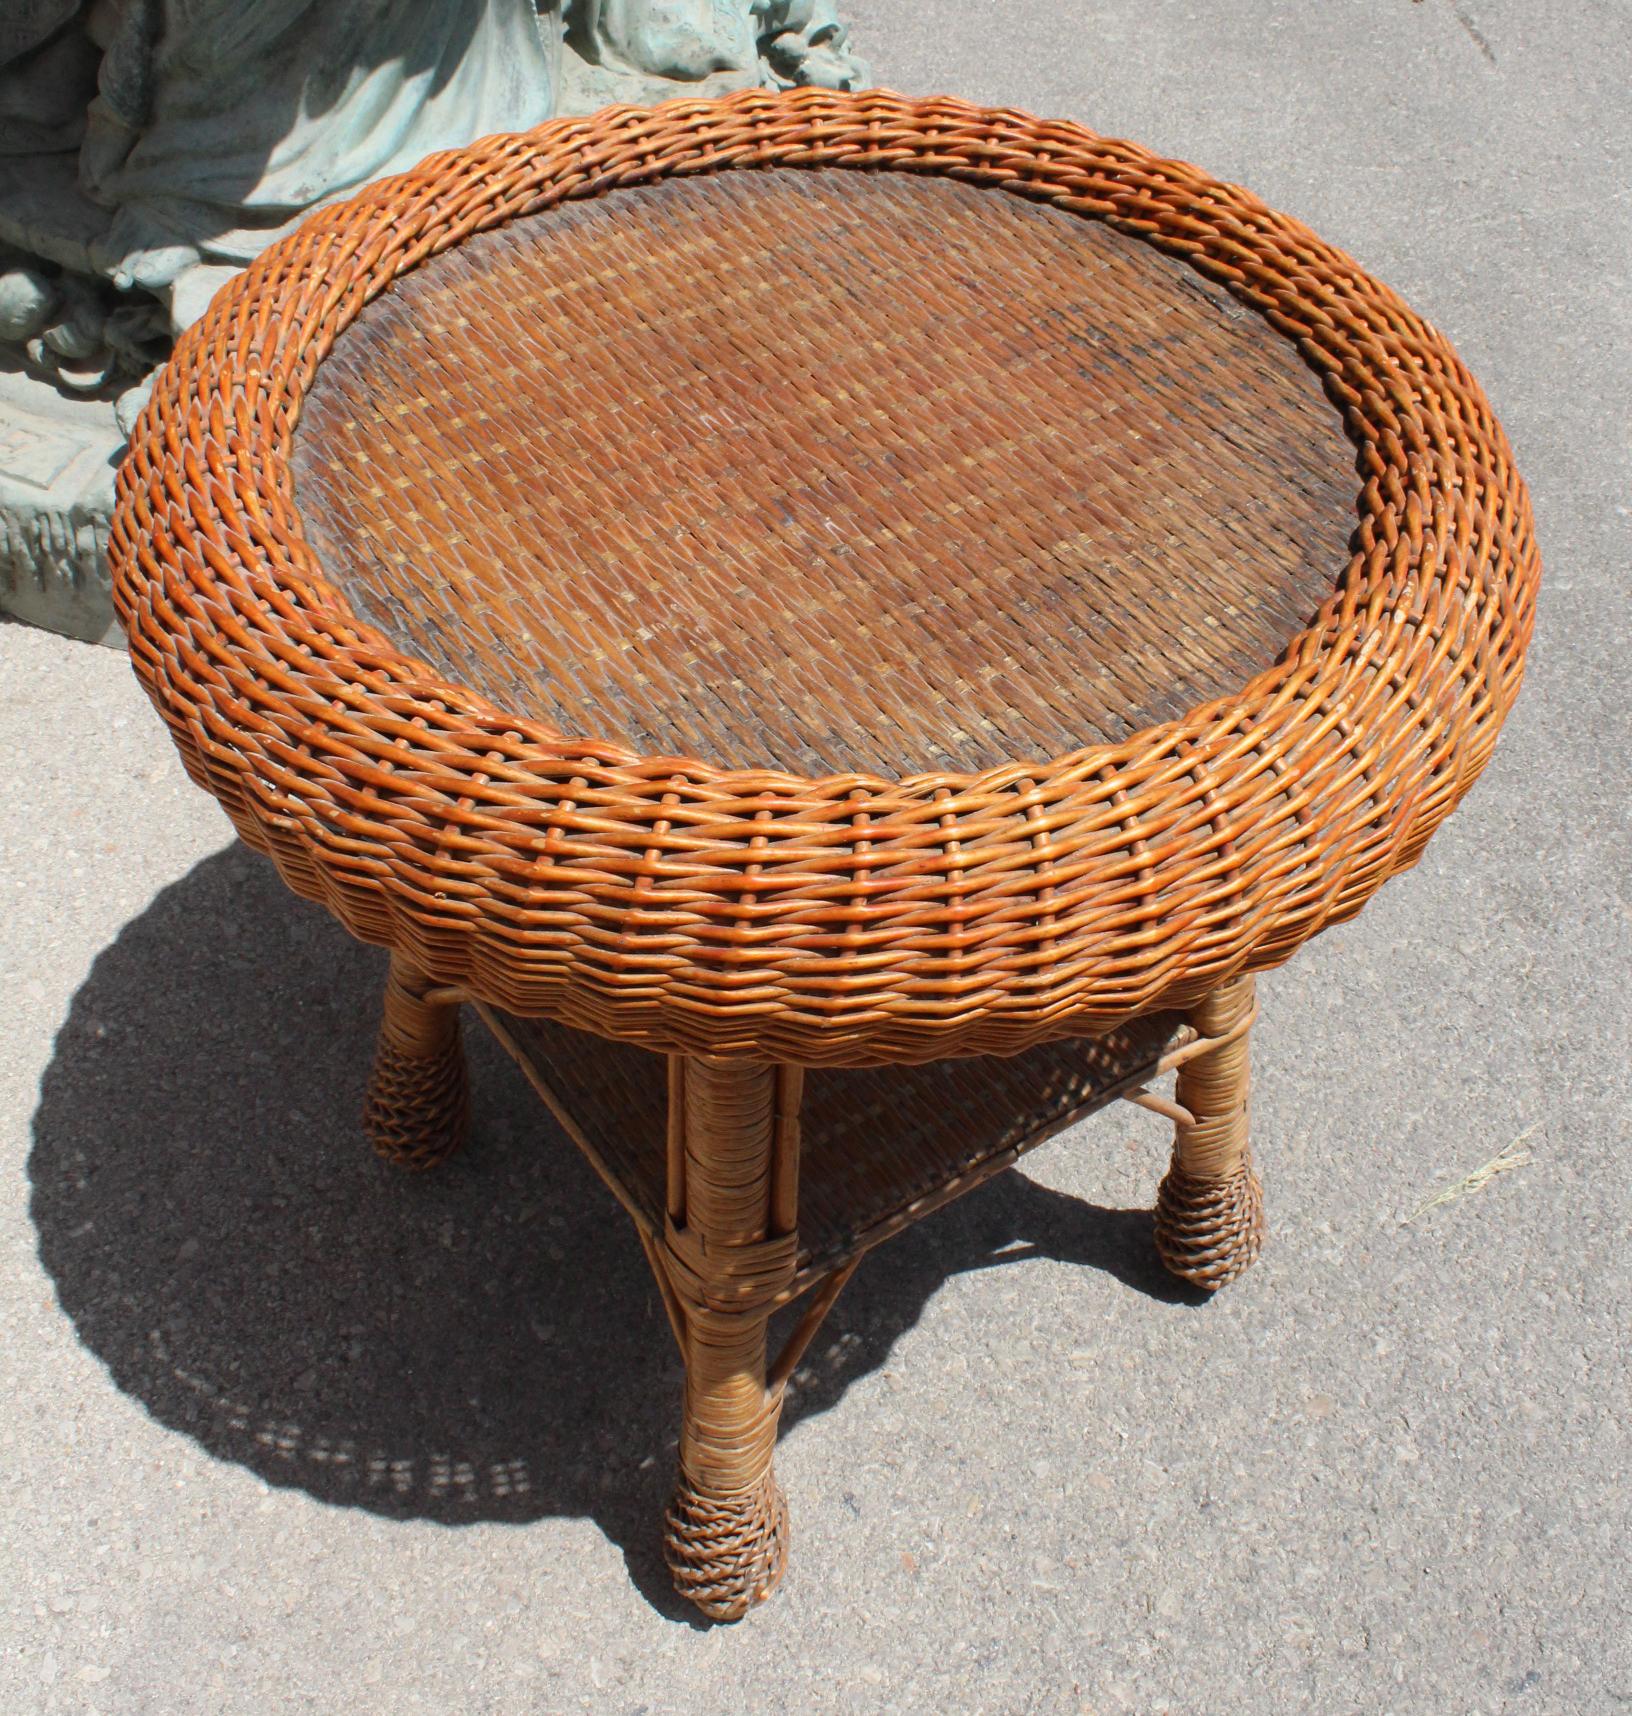 1980s Spanish handwoven wicker round side table with a glass top.